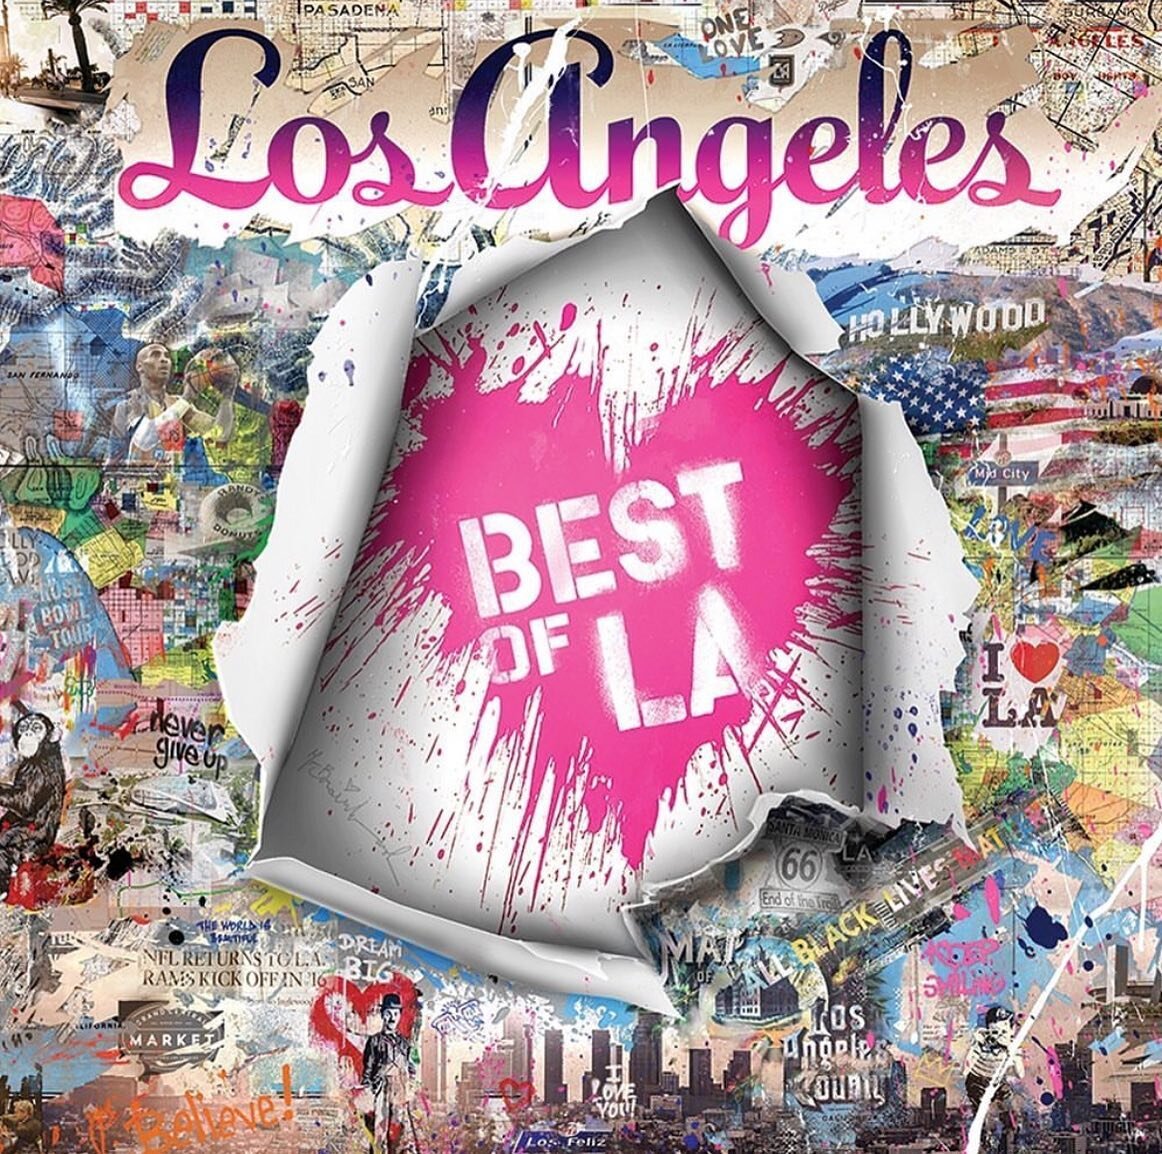 THANK YOU FOR THE CONSIDERATION @lamag - ESPECIALLY WITH ALL THE GREATS - WE LOVE YOU LOS ANGELES #Vote #EatTacos